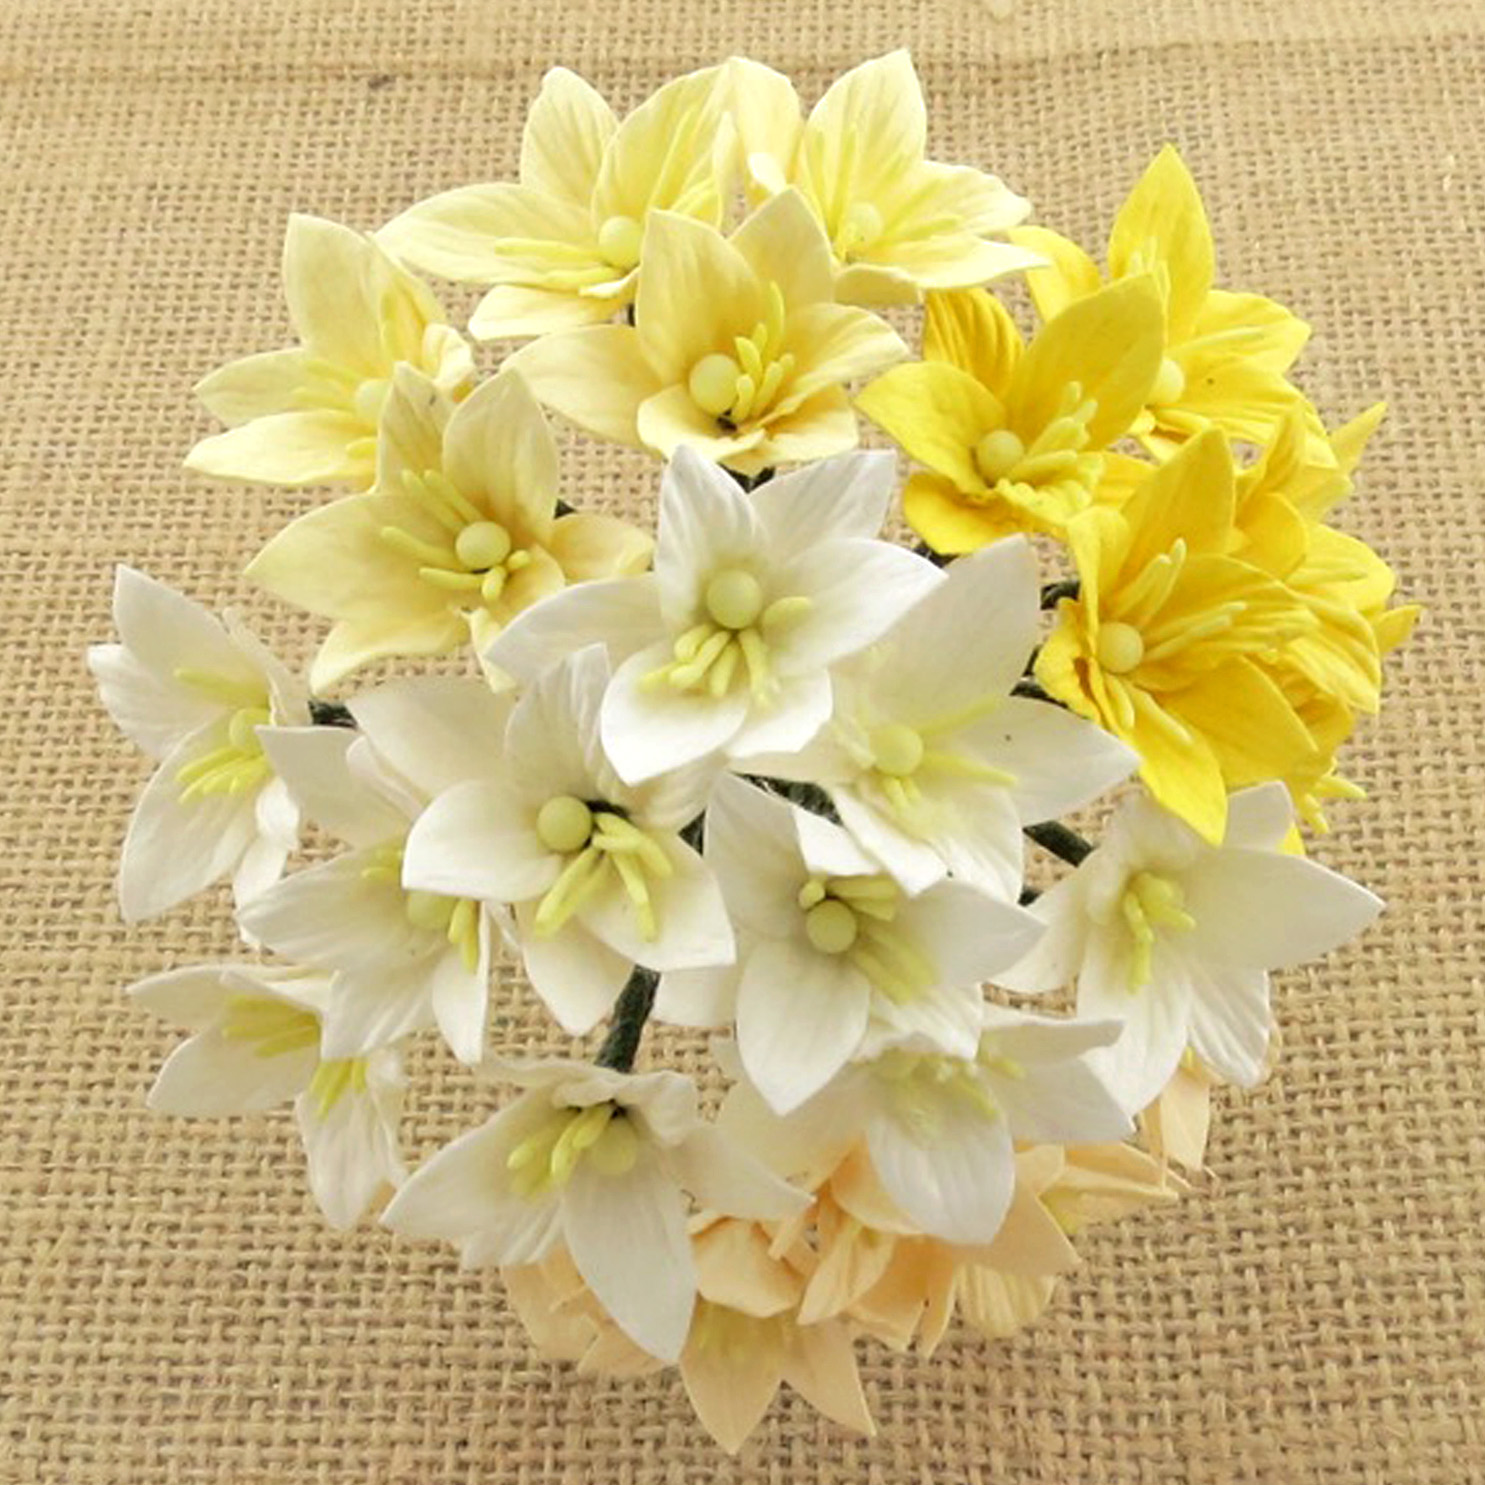 50 MIXED WHITE/CREAM MULBERRY PAPER LILY FLOWERS - 5 COLOR